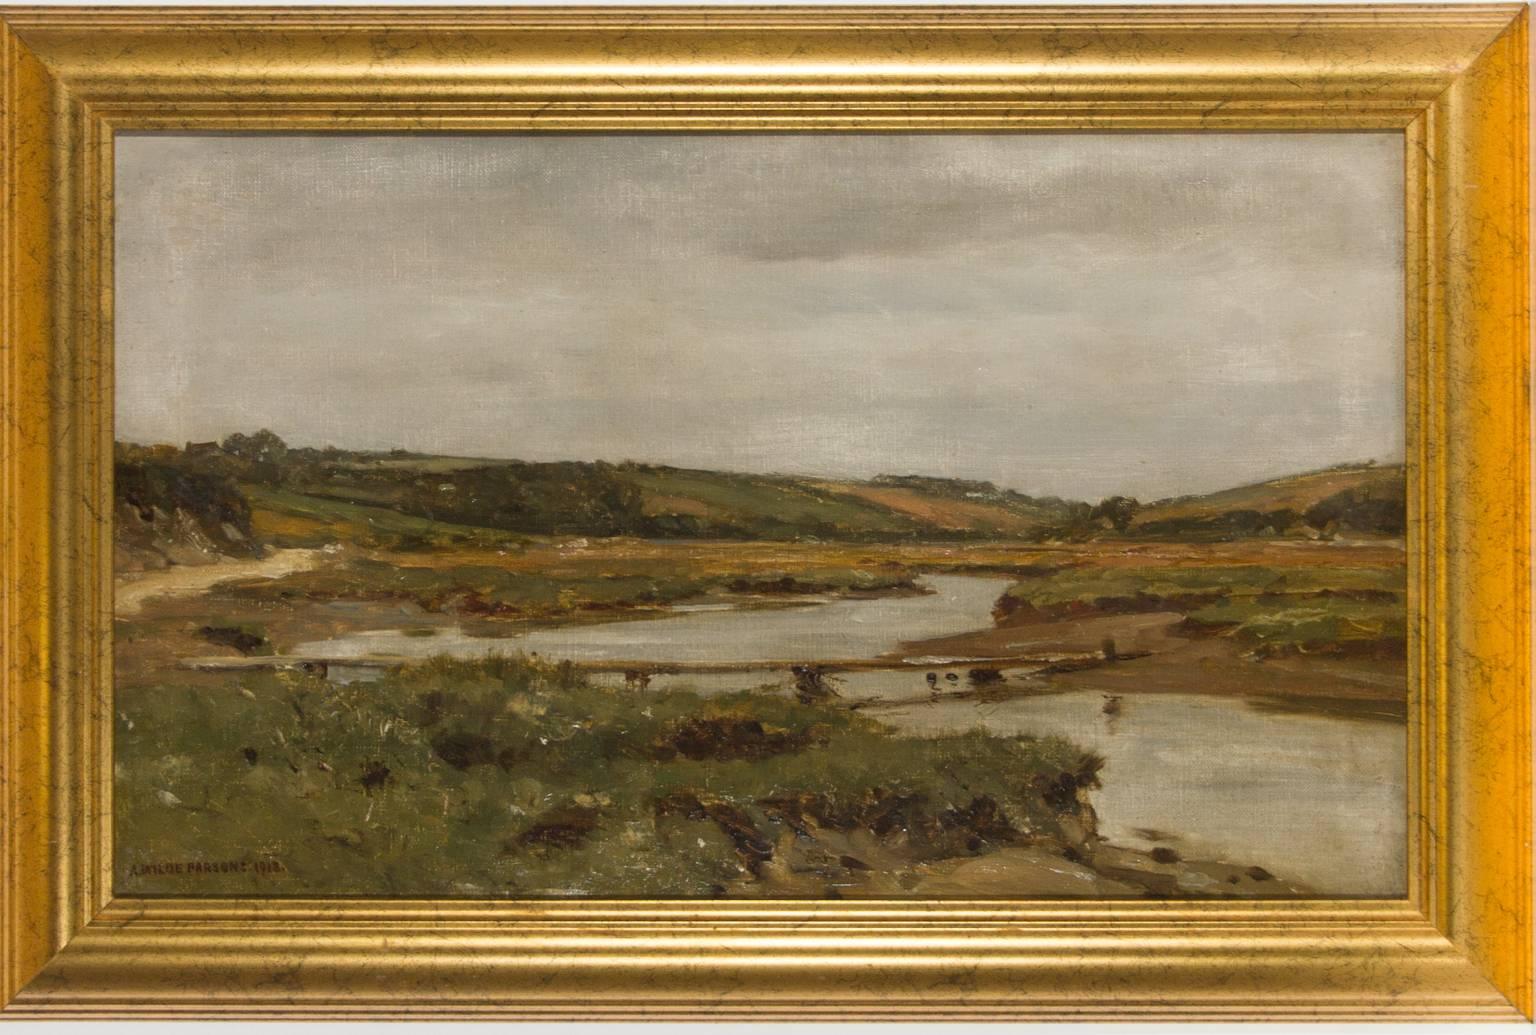 Arthur Wilde Parsons (1854-1931) - Fine Signed Original 1913 Oil. In a gilt frame, location is inscribed on the reverse of the canvas. Signed to the lower left by the artist. On canvas on stretchers. 

Image size: 29.5 x 49.5cm (11.6" x 19.5")